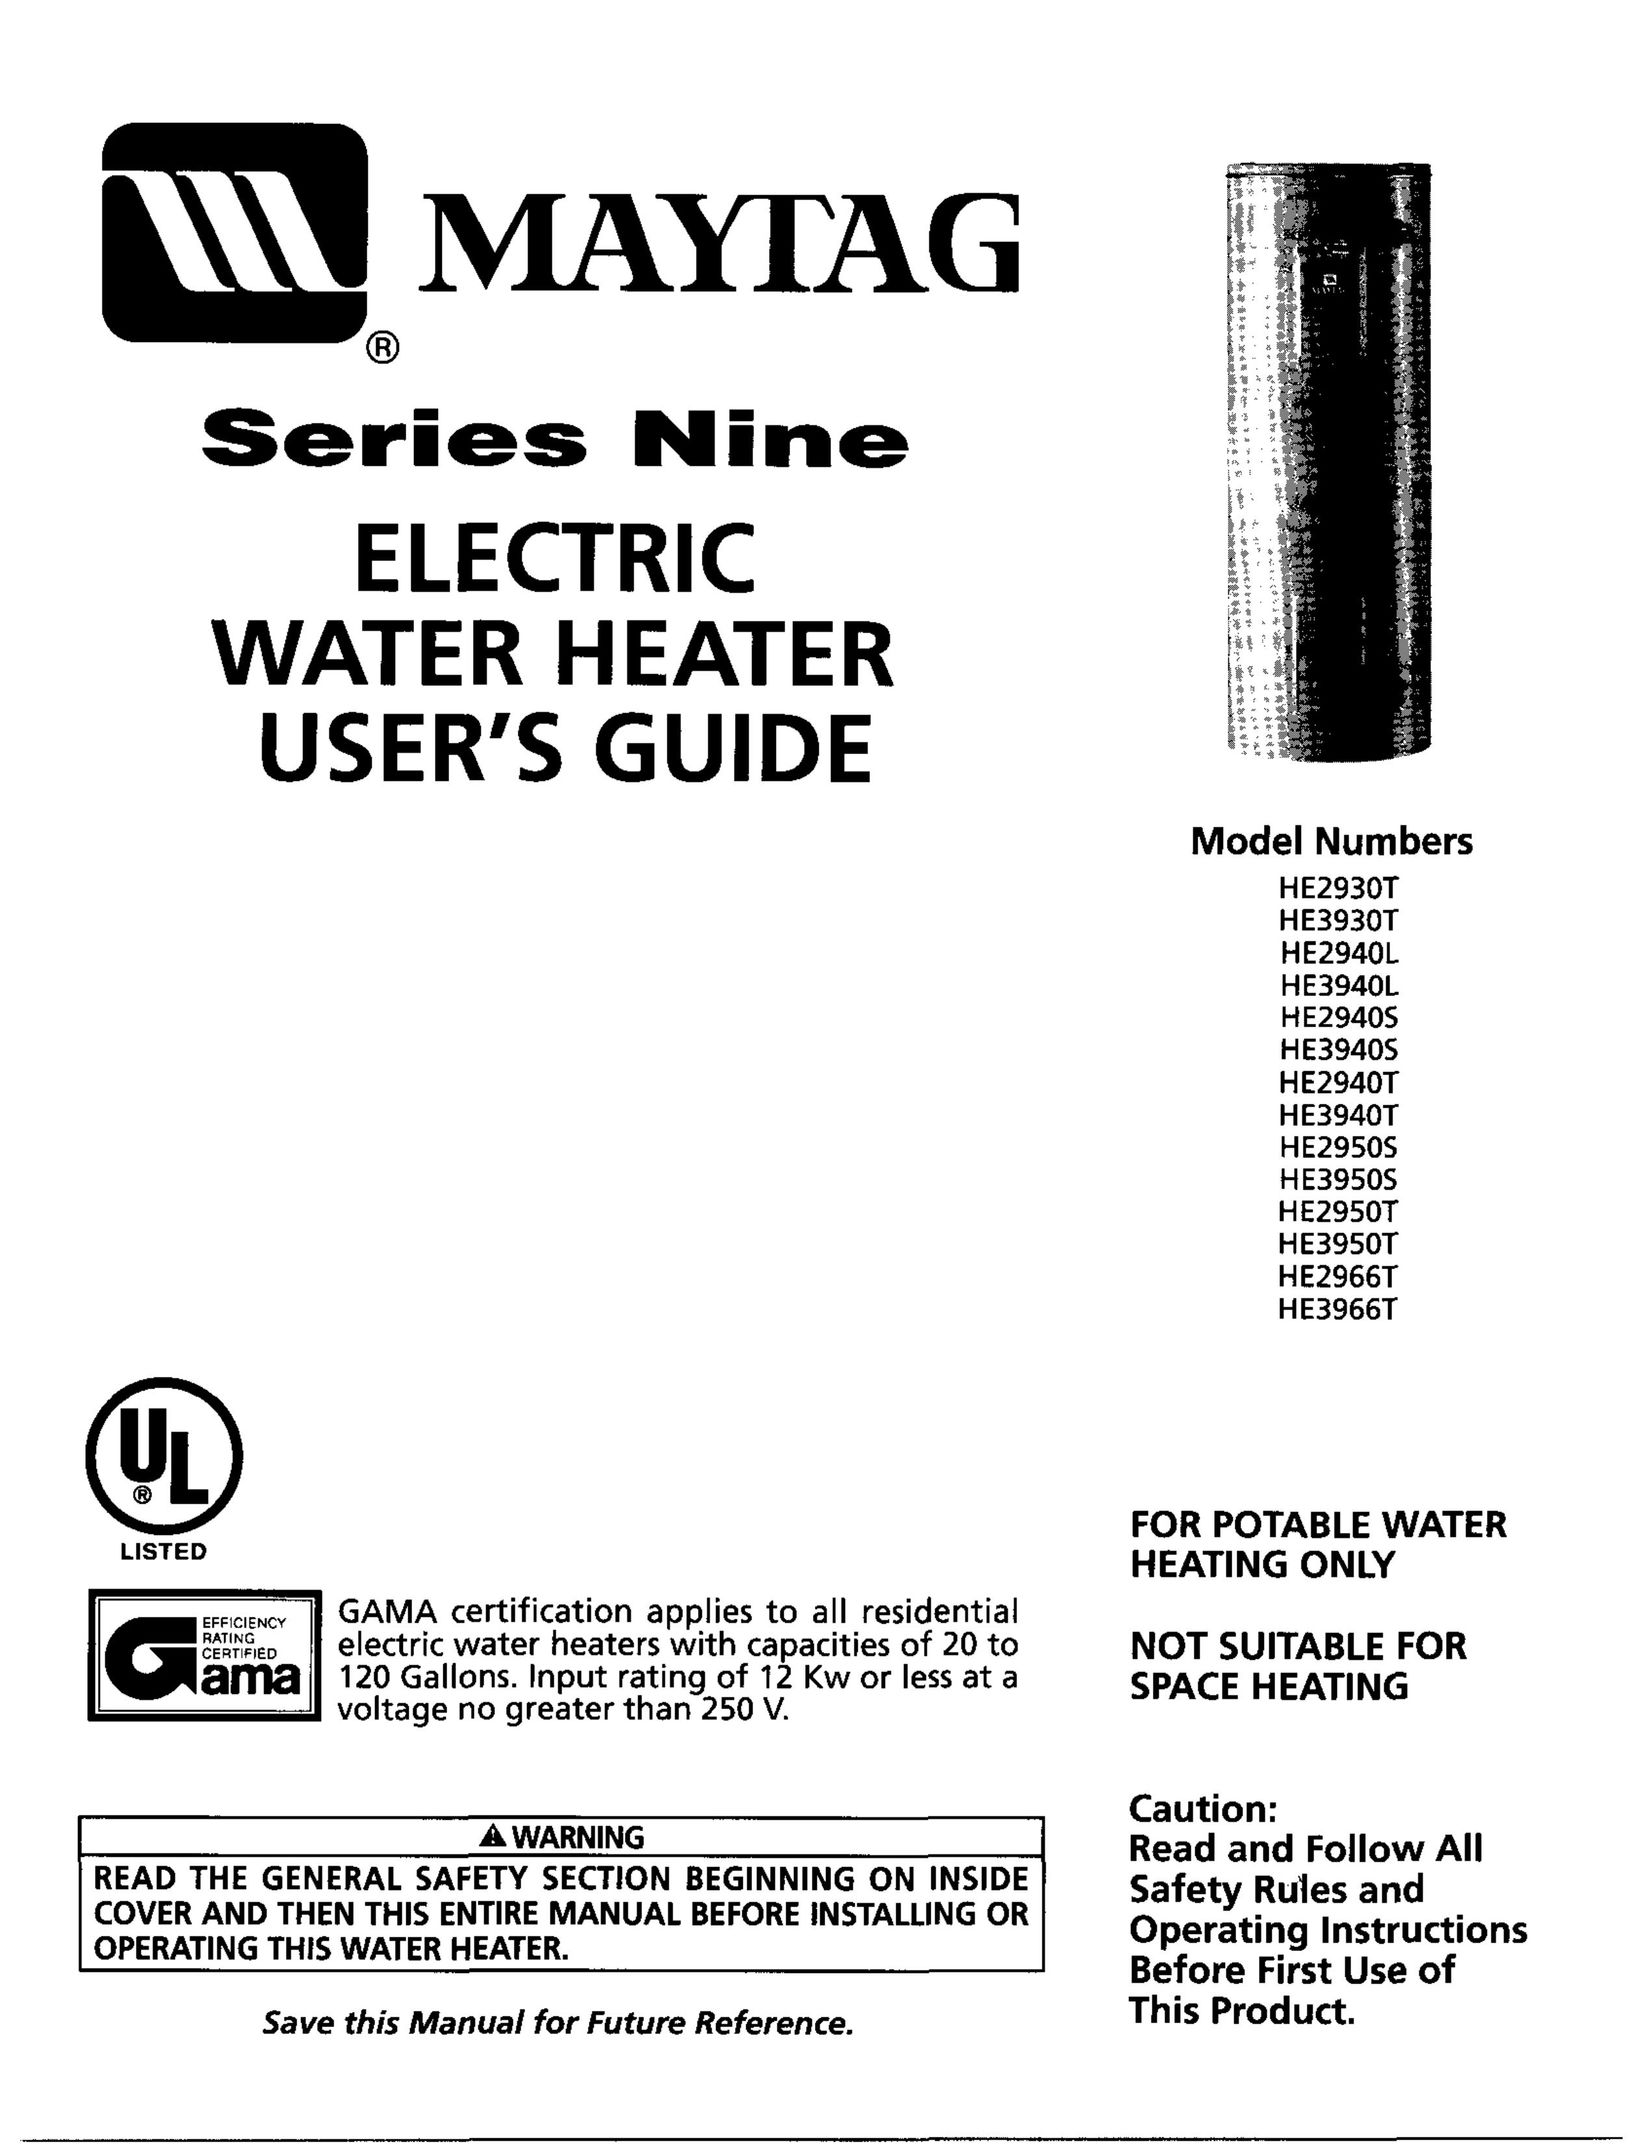 Maytag HE3966T Water Heater User Manual